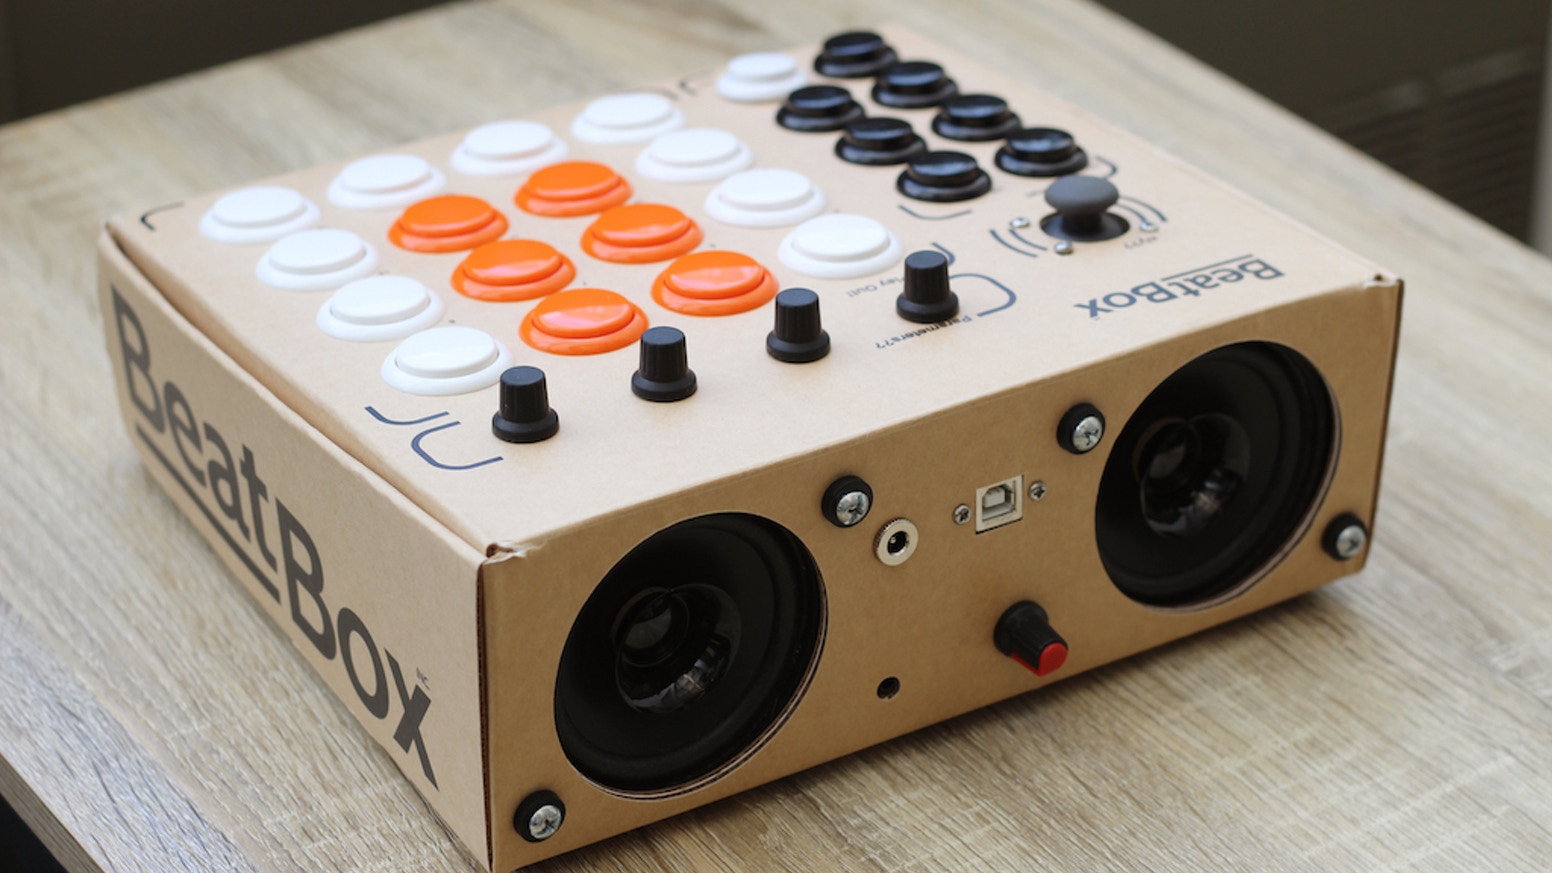 Crowdfunded hardware startups are breathing fresh life into music making